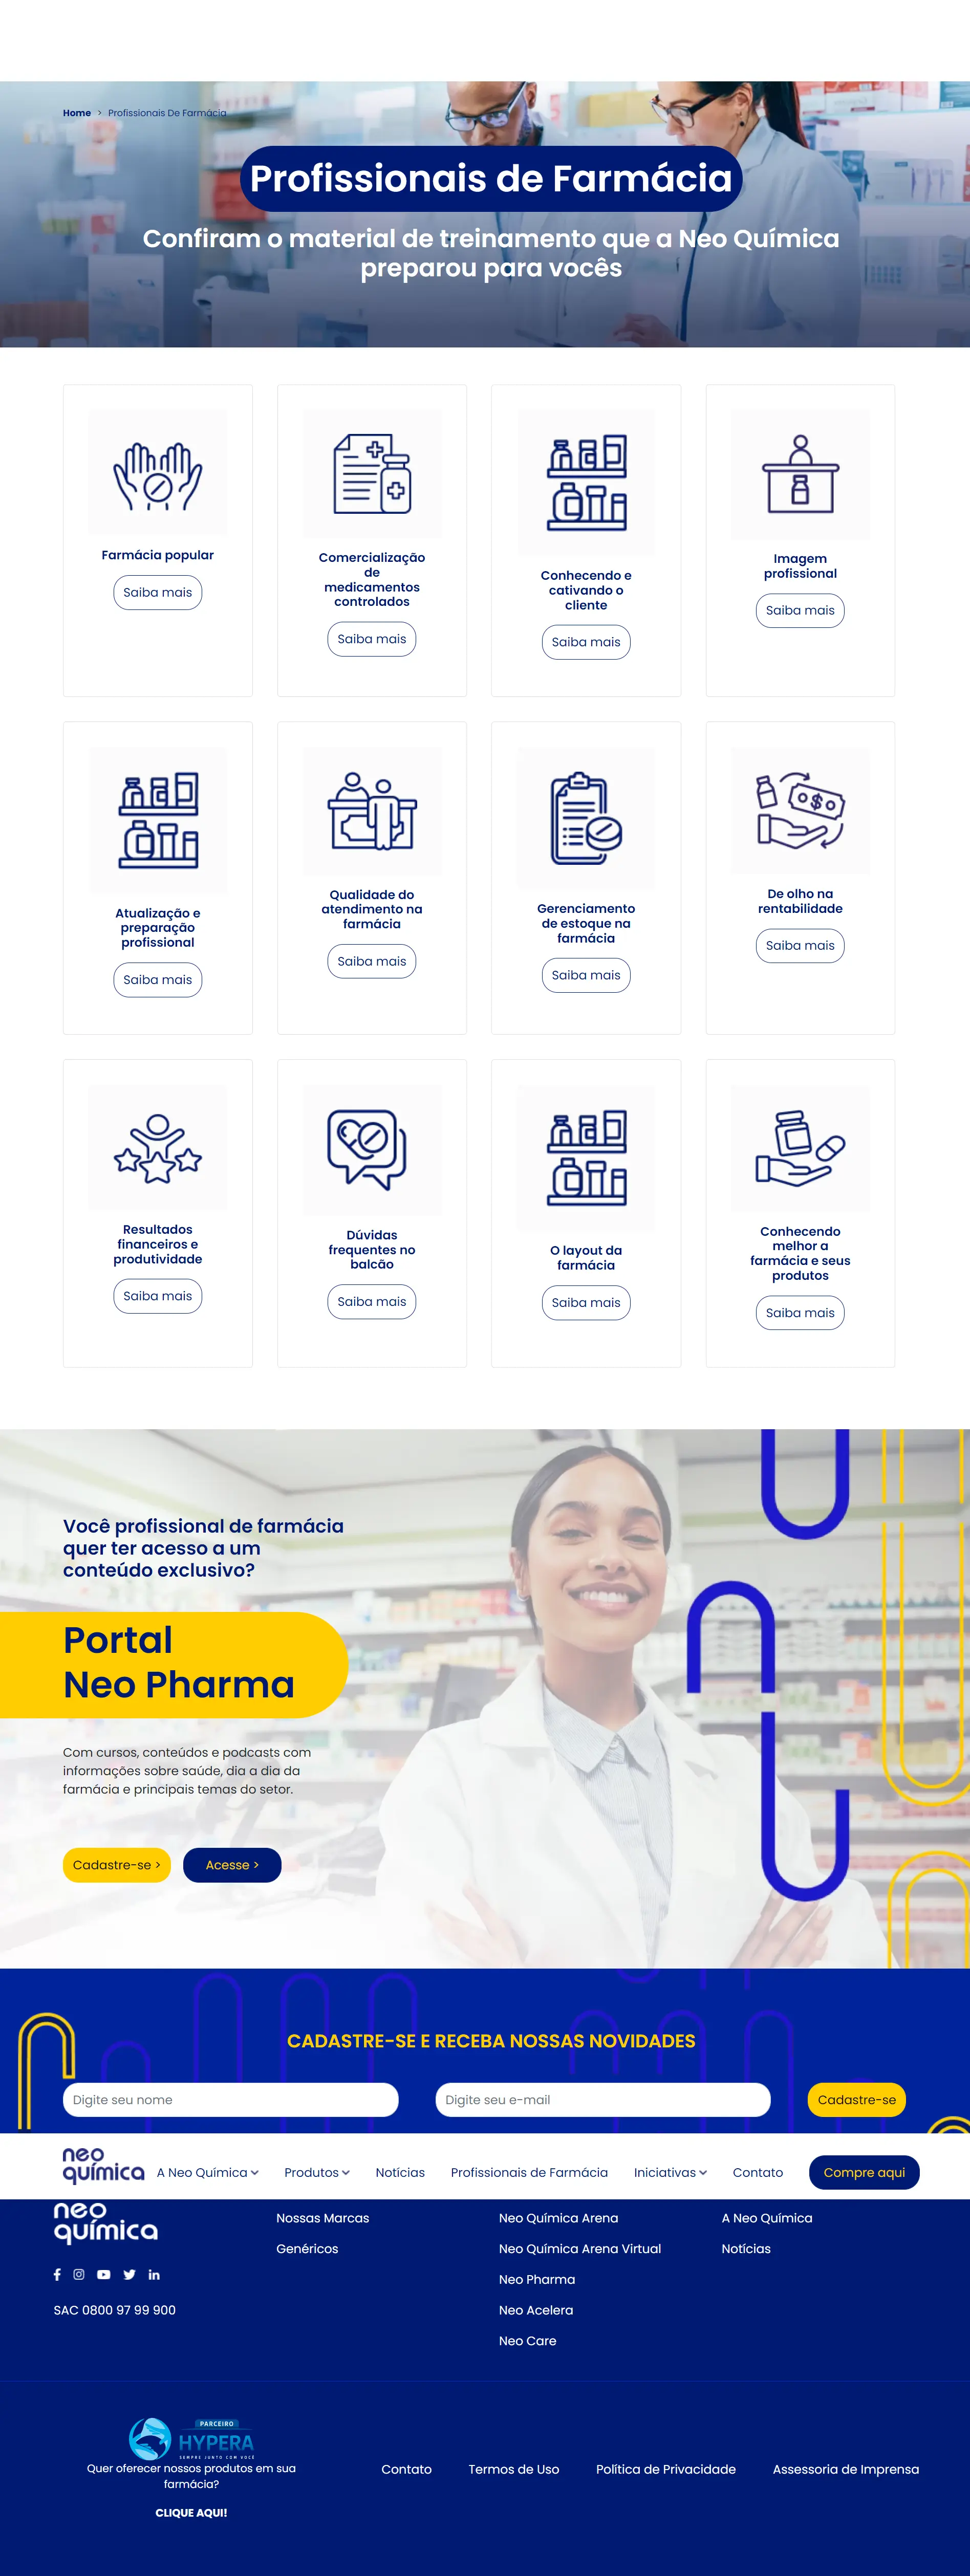 Screenshot image of the pharmacy professionals page on the Neo Química website.